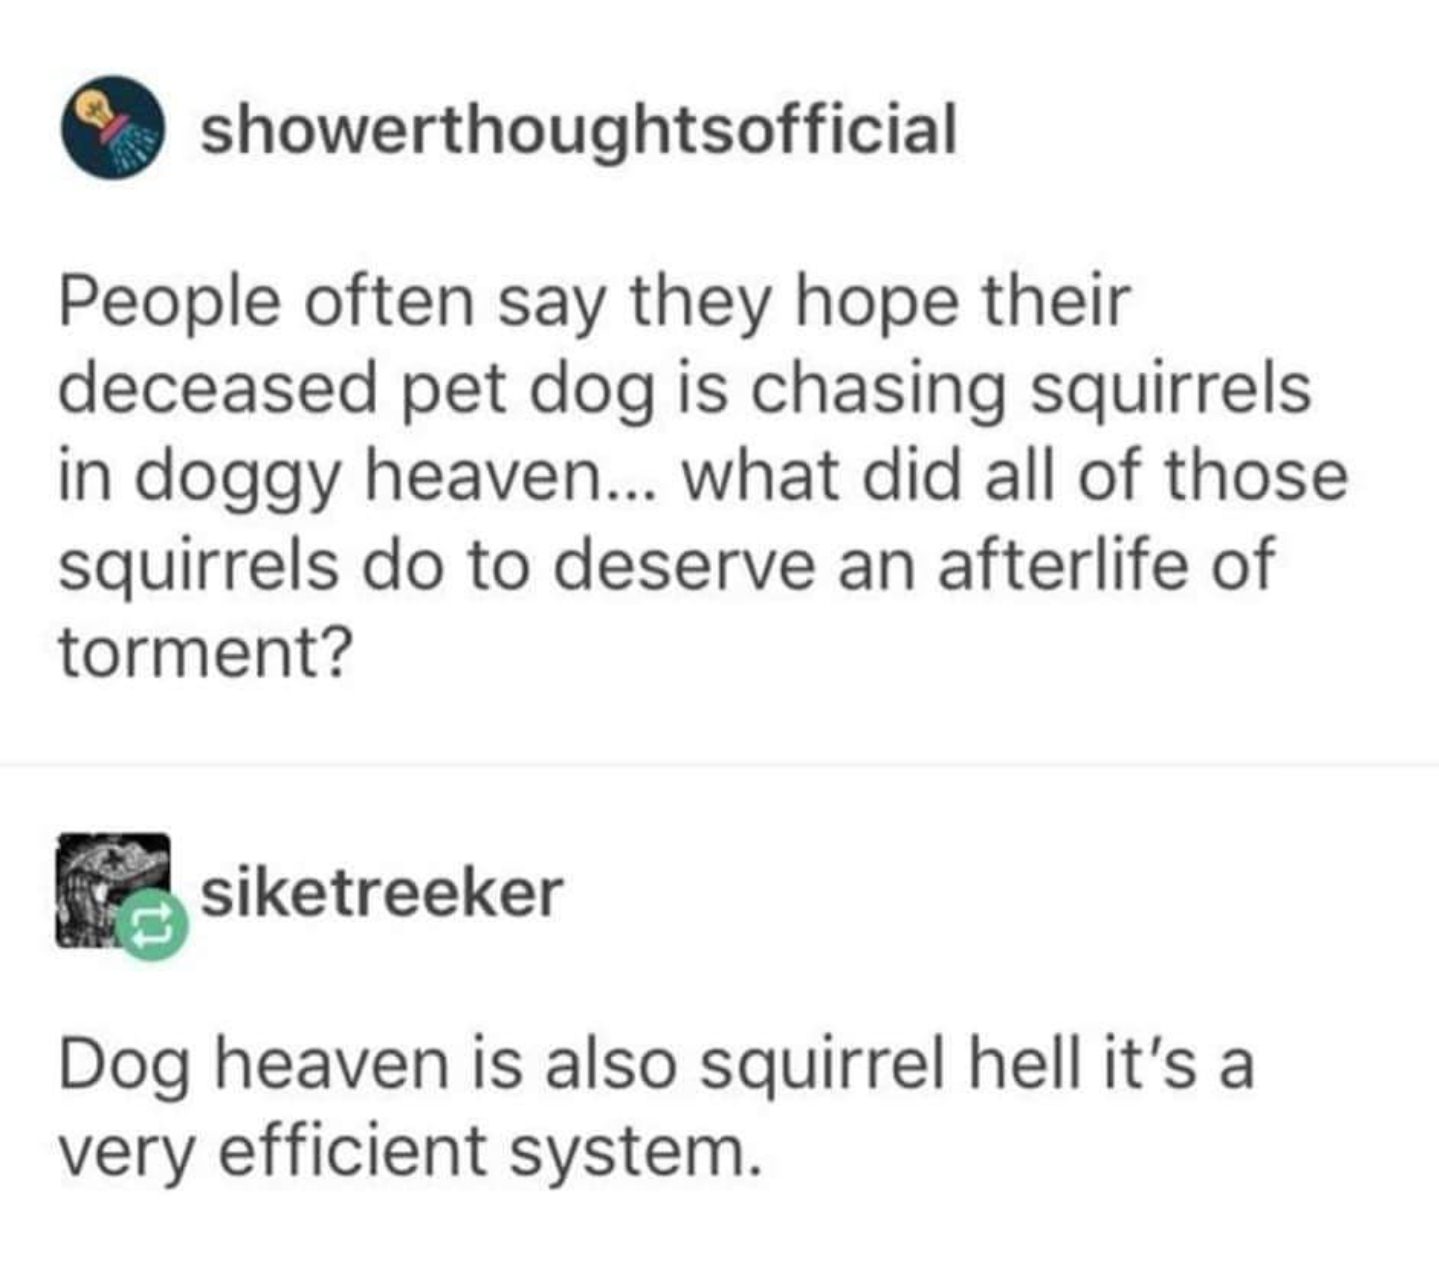 dog heaven squirrel hell - showerthoughtsofficial People often say they hope their deceased pet dog is chasing squirrels in doggy heaven... what did all of those squirrels do to deserve an afterlife of torment? siketreeker Dog heaven is also squirrel hell